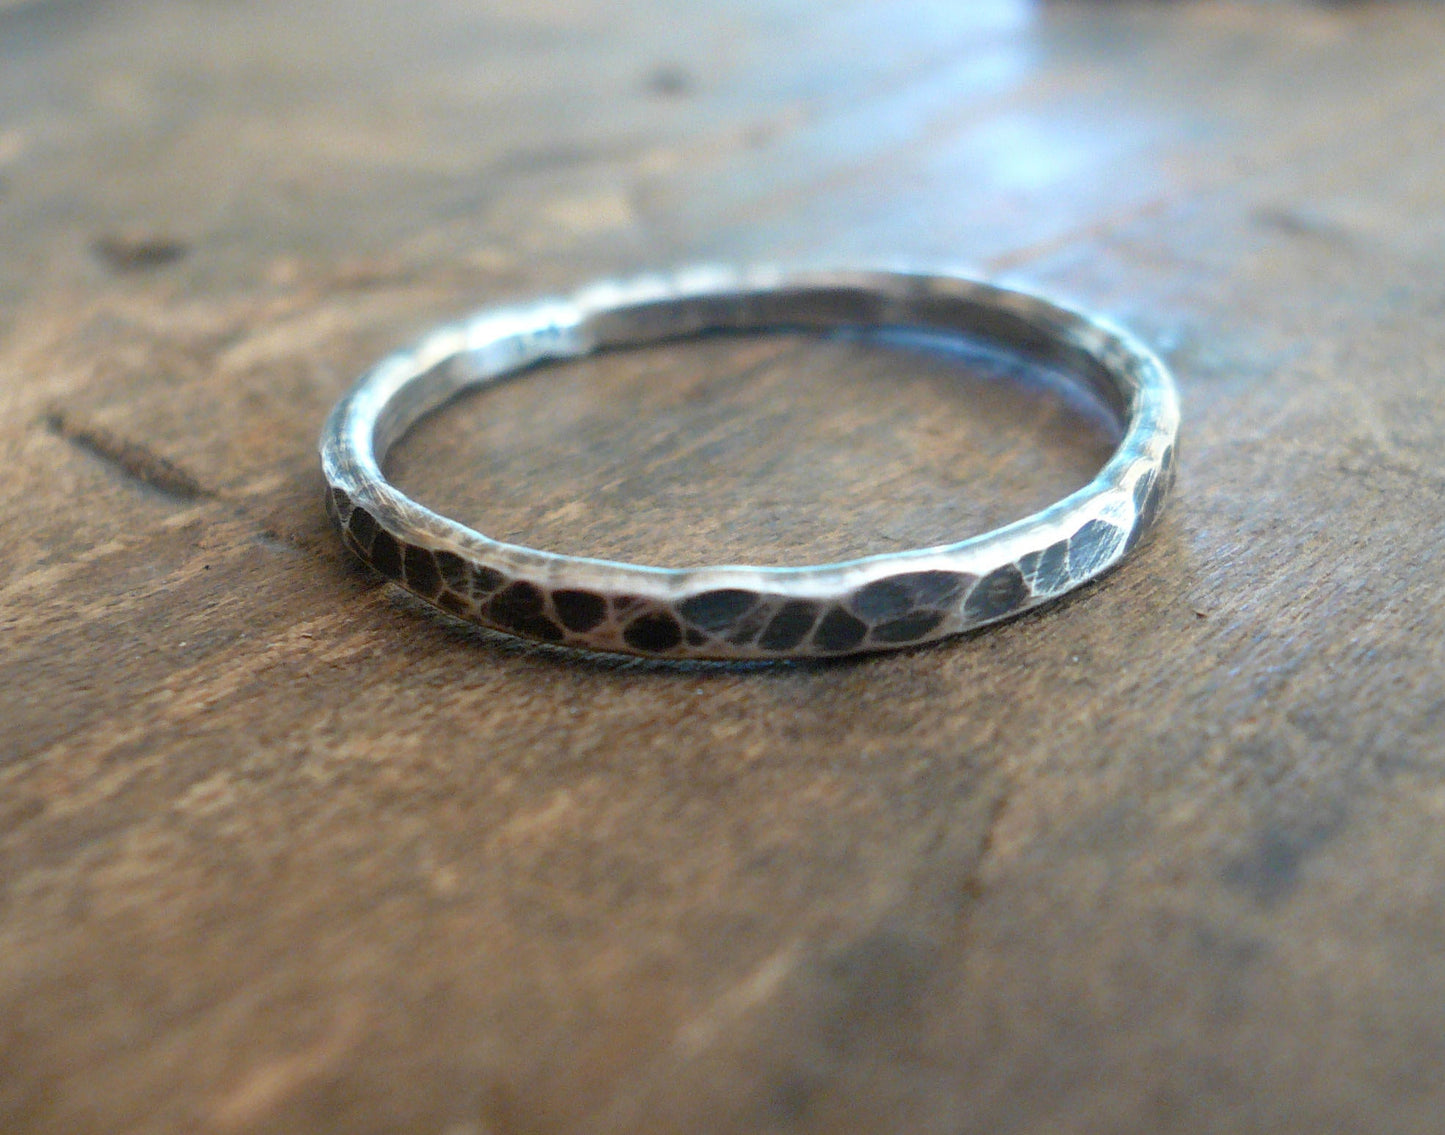 Mangly Ring - Sterling Silver Oxidized Hammered Stacking Ring. Hand made by jNic Designs